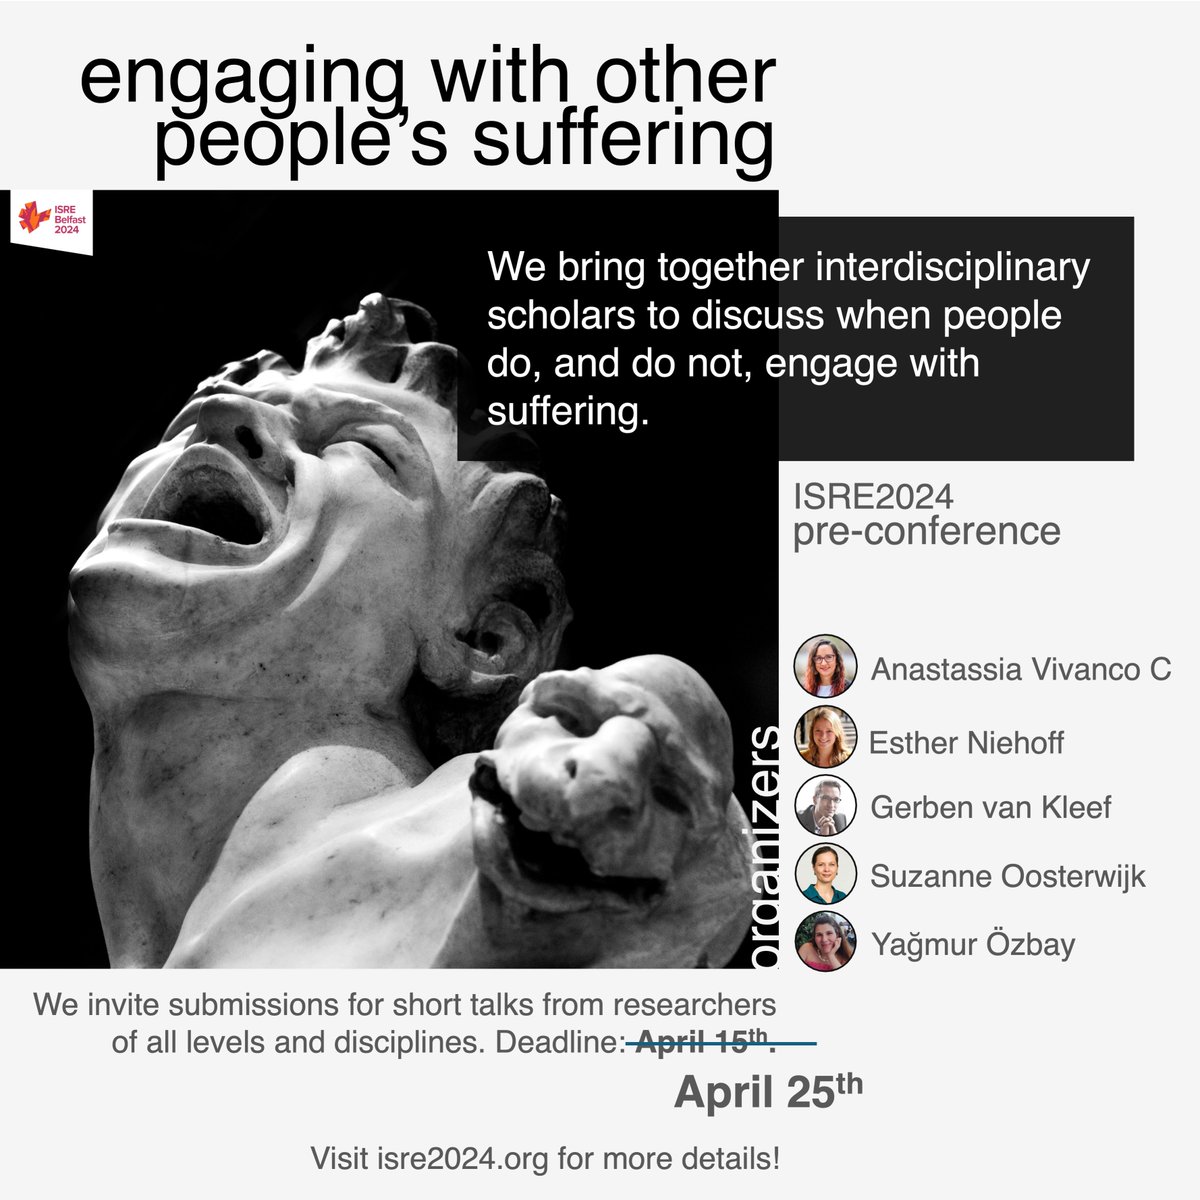 📢 DEADLINE EXTENDED! If you are interested in #eudaimonia, #empathy, #curiosity & #prosociality, don't miss this #ISRE2024 pre-conference deadline! Now, April 25th, more information and submit your contribution here: sites.google.com/view/isre2024s…